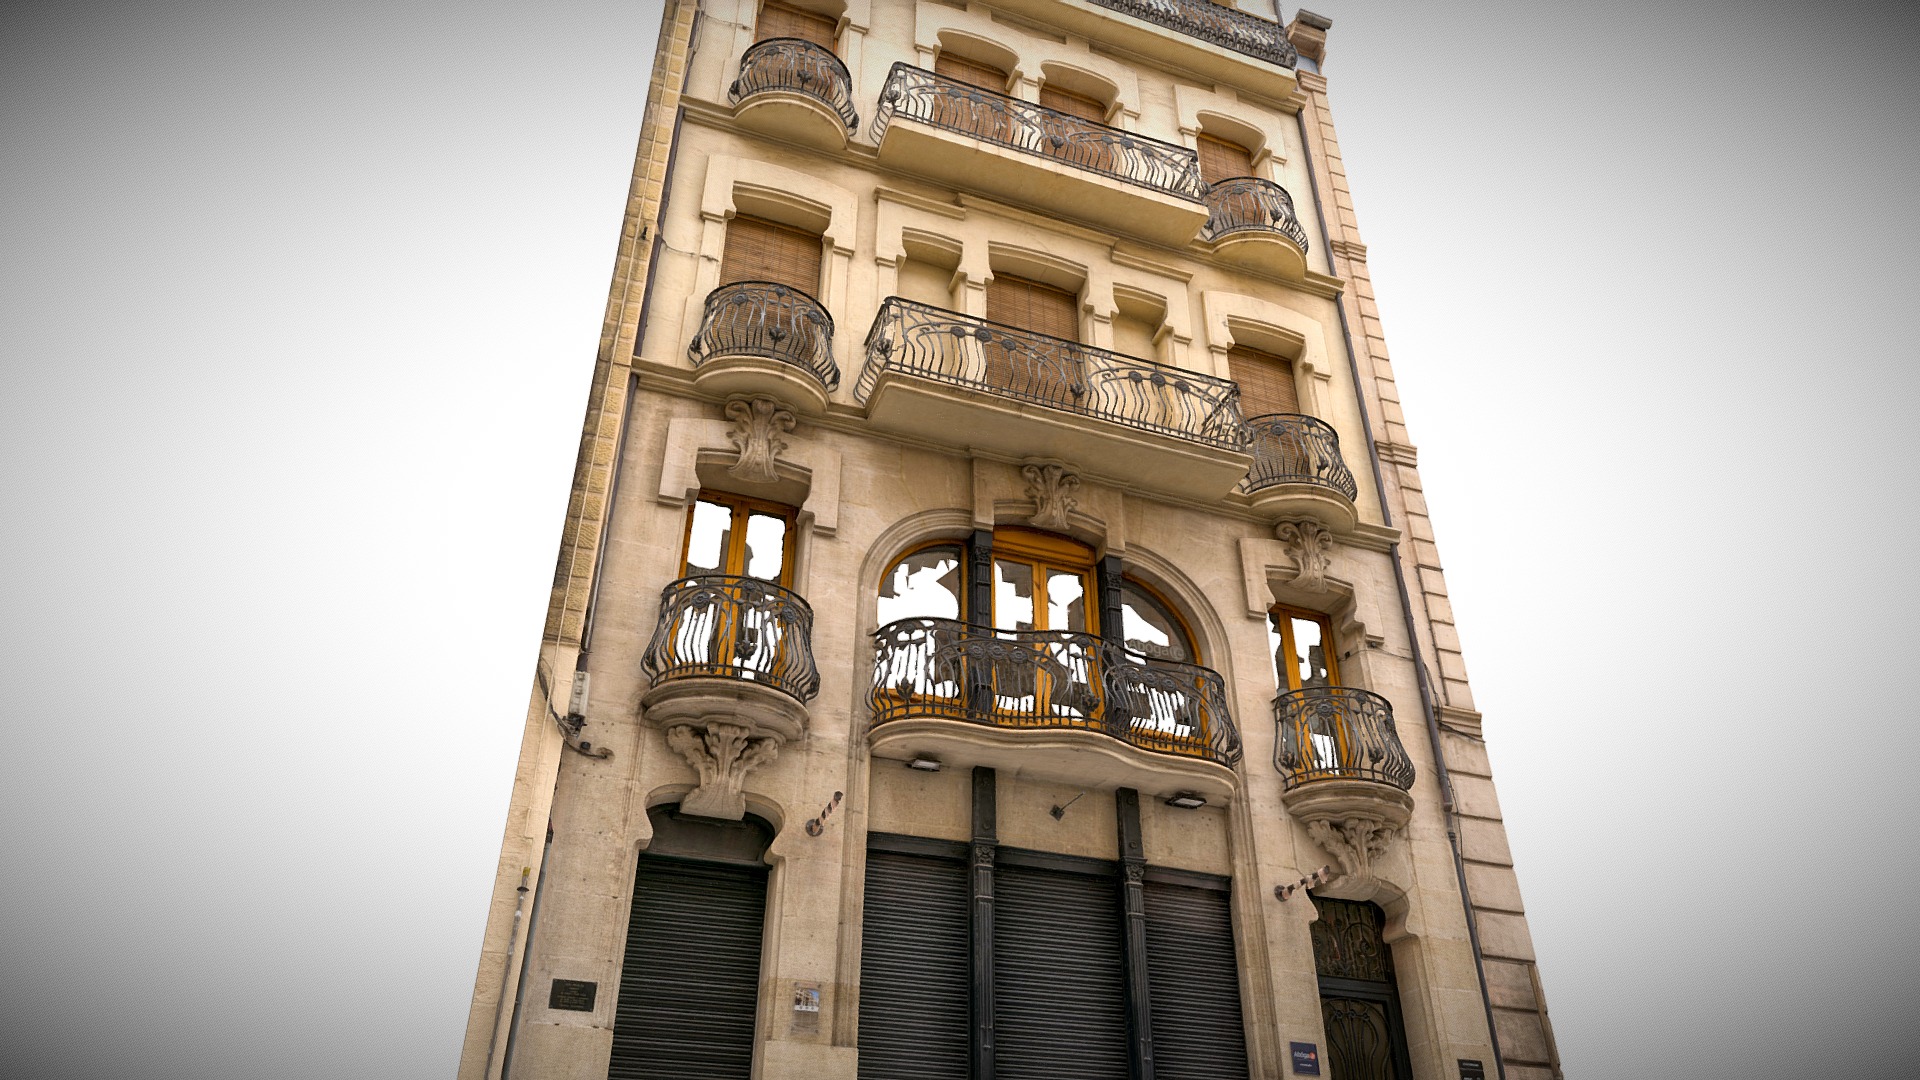 3D model Art Nouveau Building Modernismo "Casa Raduán" - This is a 3D model of the Art Nouveau Building Modernismo "Casa Raduán". The 3D model is about a tall building with many balconies and windows.